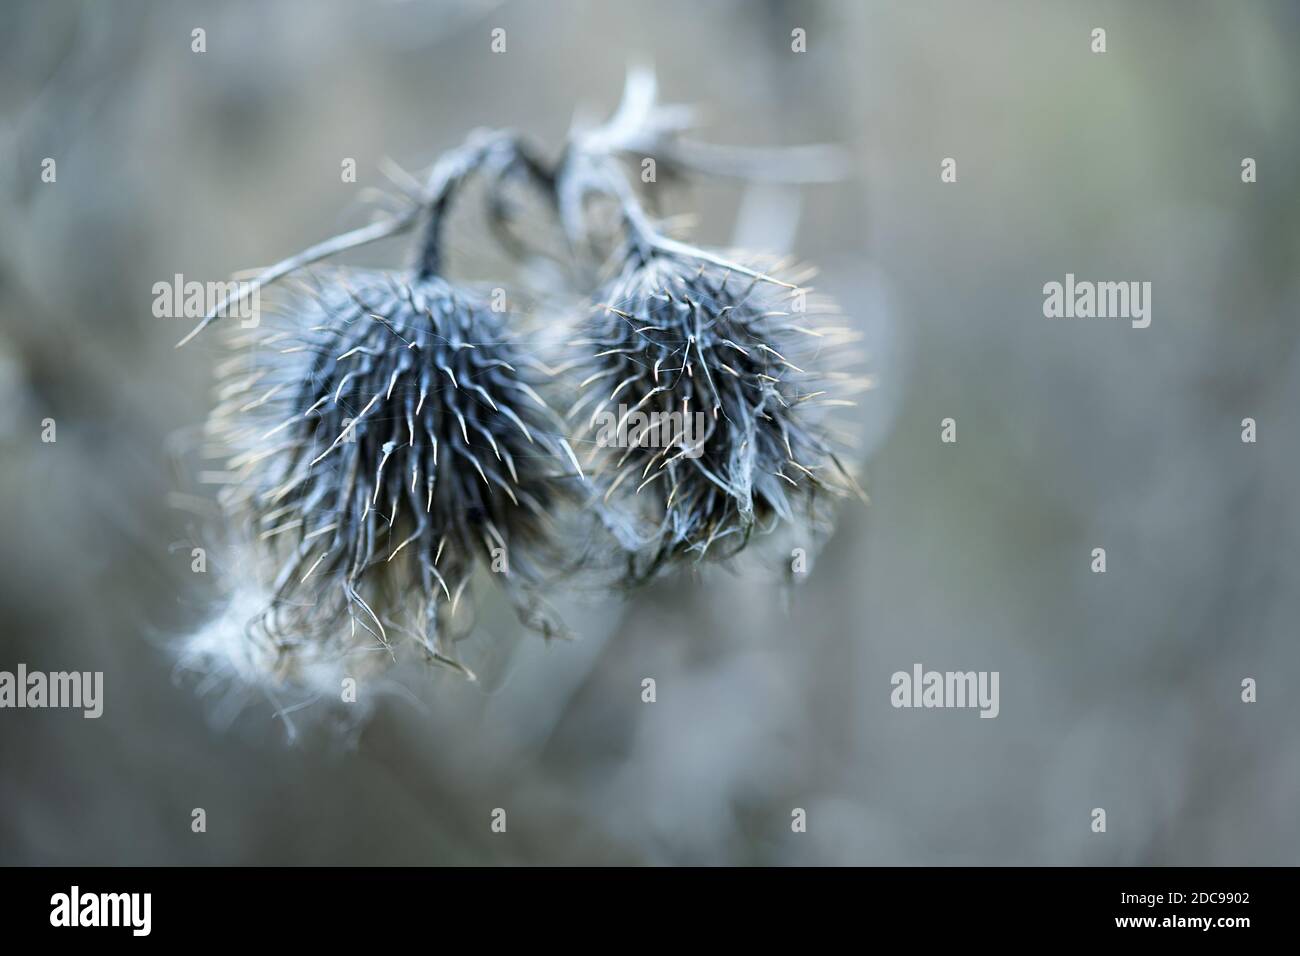 Two dried grey thistle flowers against a blurred background, nature wabi sabi concept, symbol for togetherness, perseverance and transience, copy spac Stock Photo